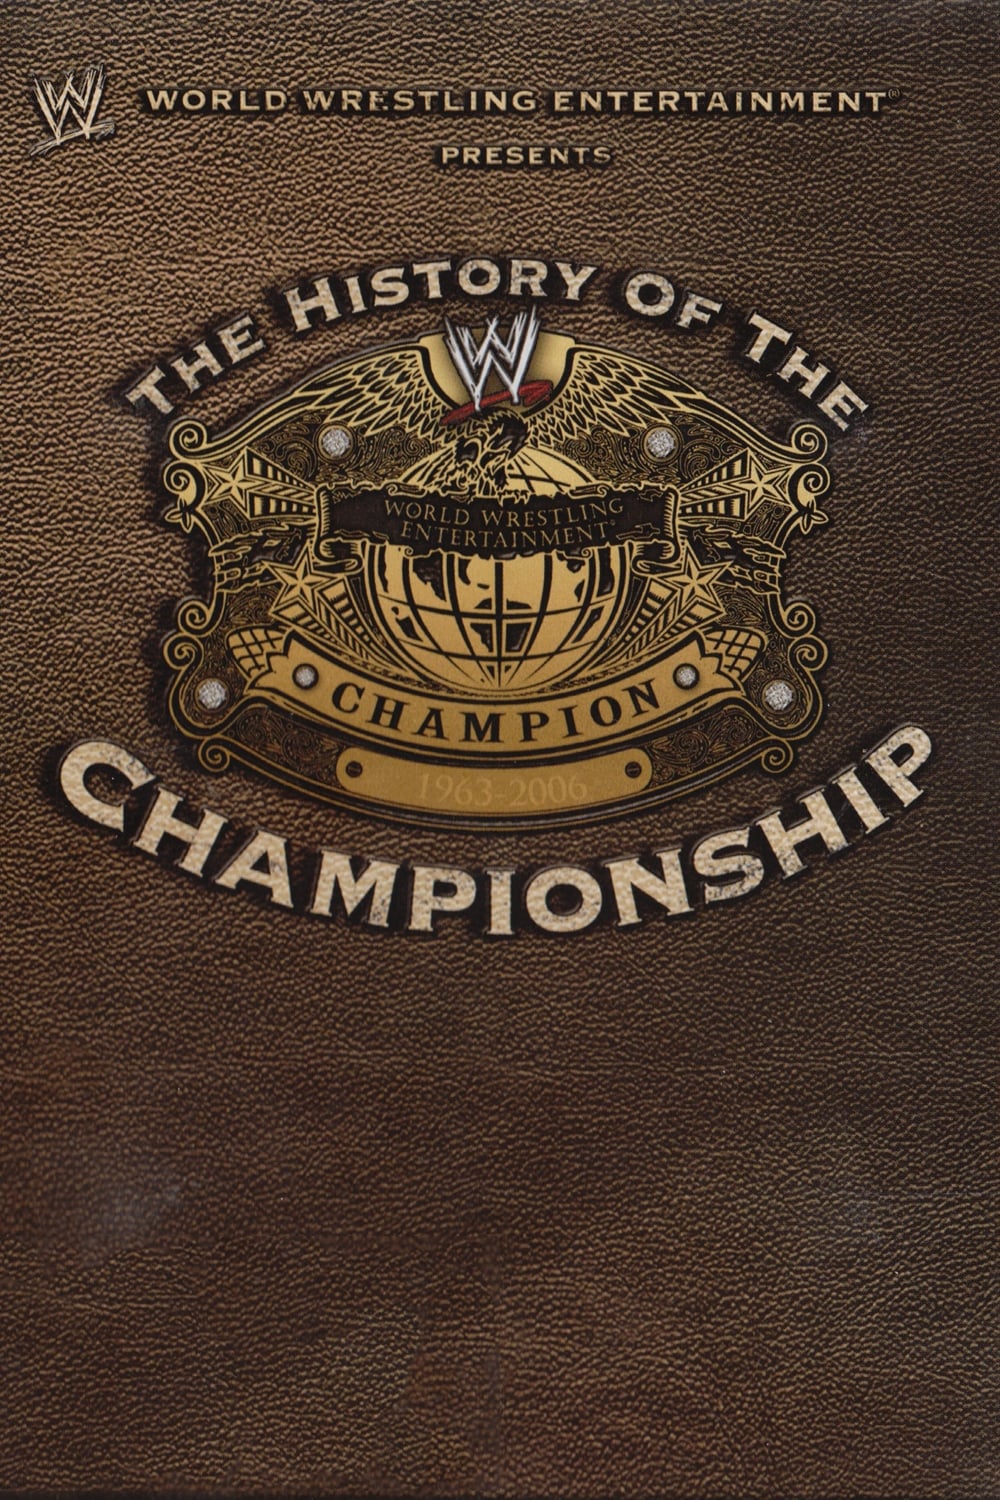 WWE: The History Of The WWE Championship